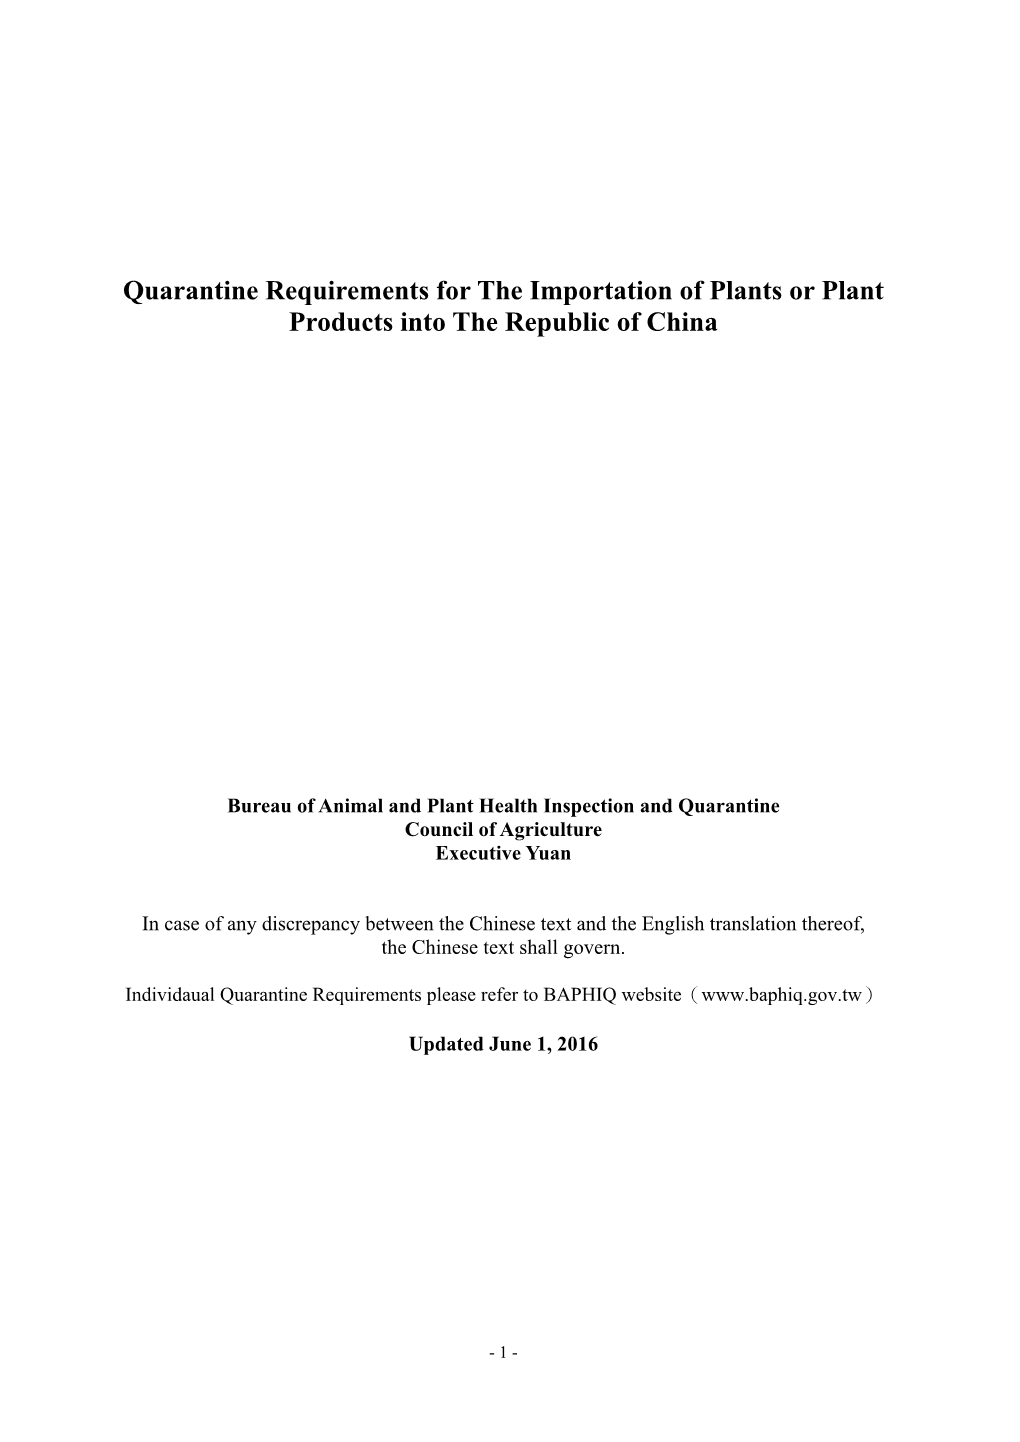 Quarantine Requirements for the Importation of Plants Or Plant Products Into the Republic of China